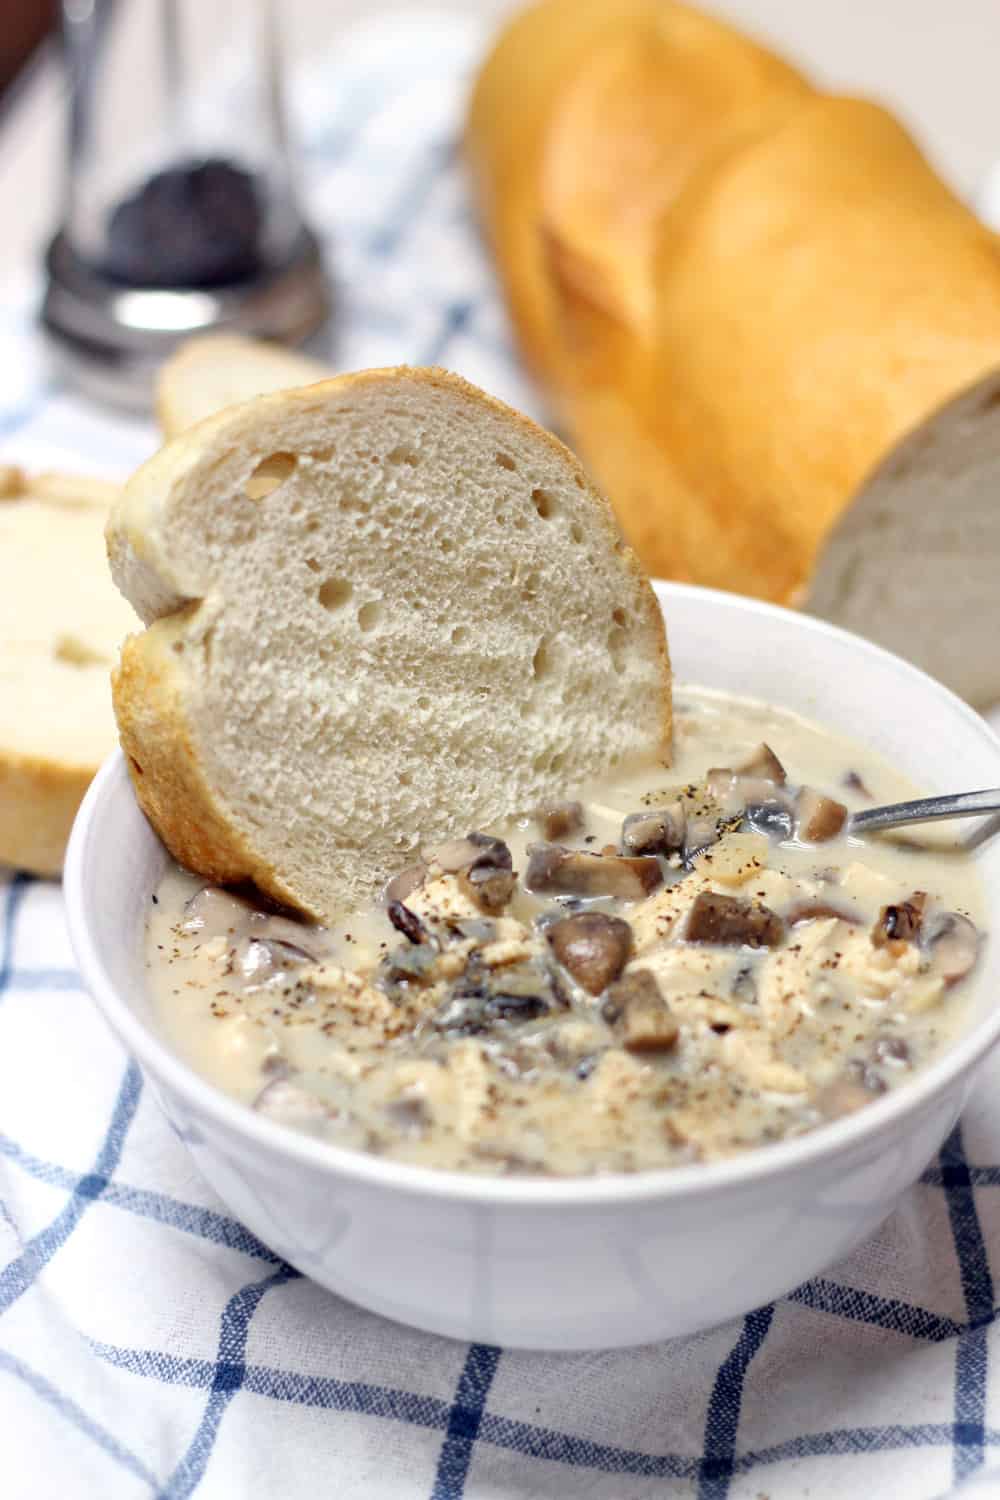 This creamy mushroom, chicken, and wild rice soup is creamy, hearty, easy to make, and super fast if you pre-cook the chicken and rice! Make a ton and freeze it for later.